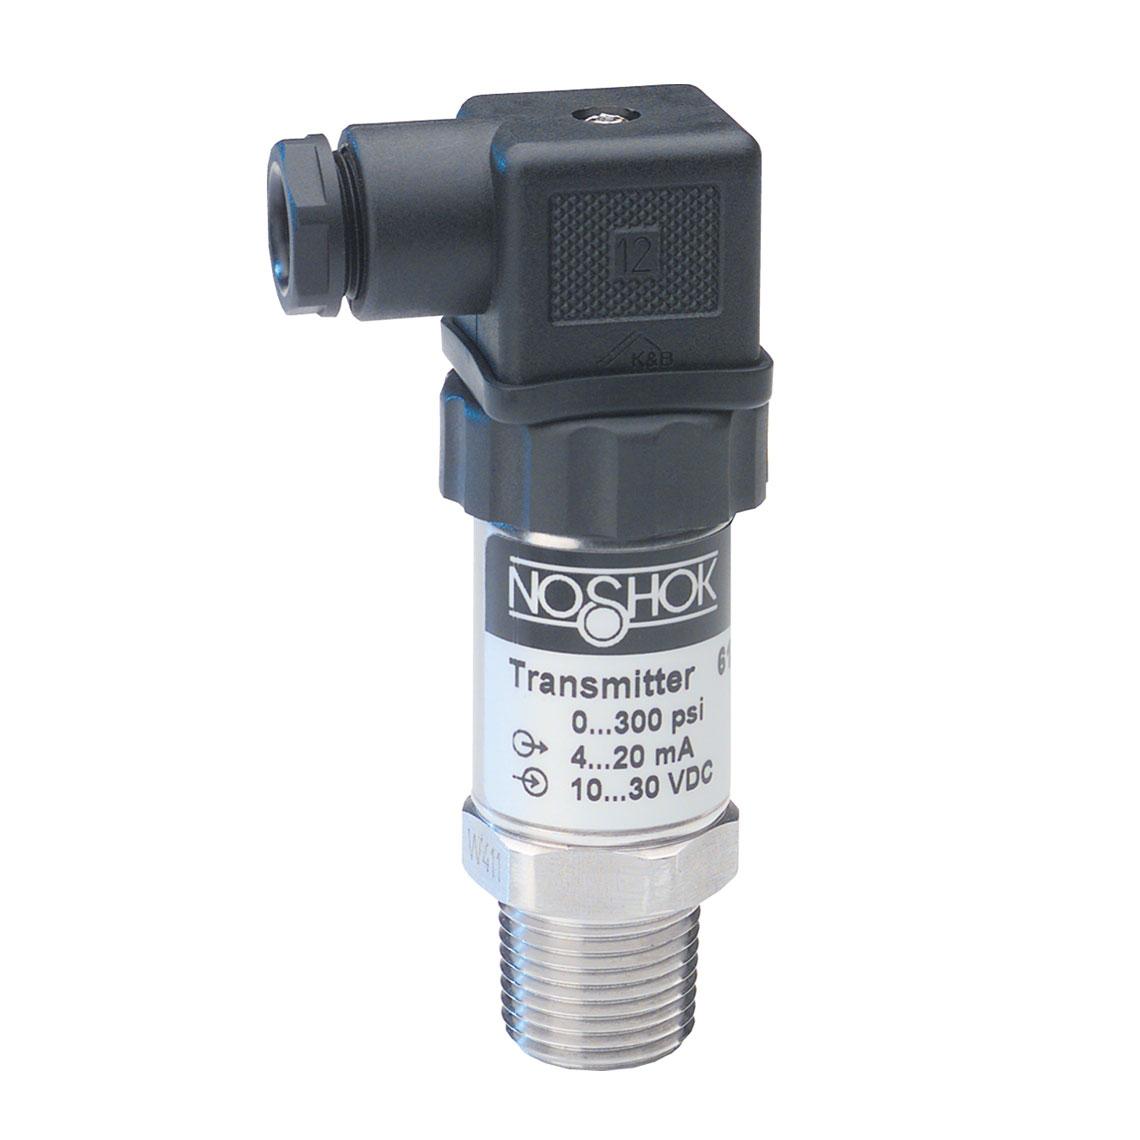 Noshok 615-30-1-1-8-8 0 to 30 psig, 0.25% Accuracy (Best Fit Straight Line (BFSL)), 4 to 20 mA Output, 1/2'' National Pipe Thread (NPT) Male Pressure Transducer with DIN EN 175301-803 Form A Electrical Connection